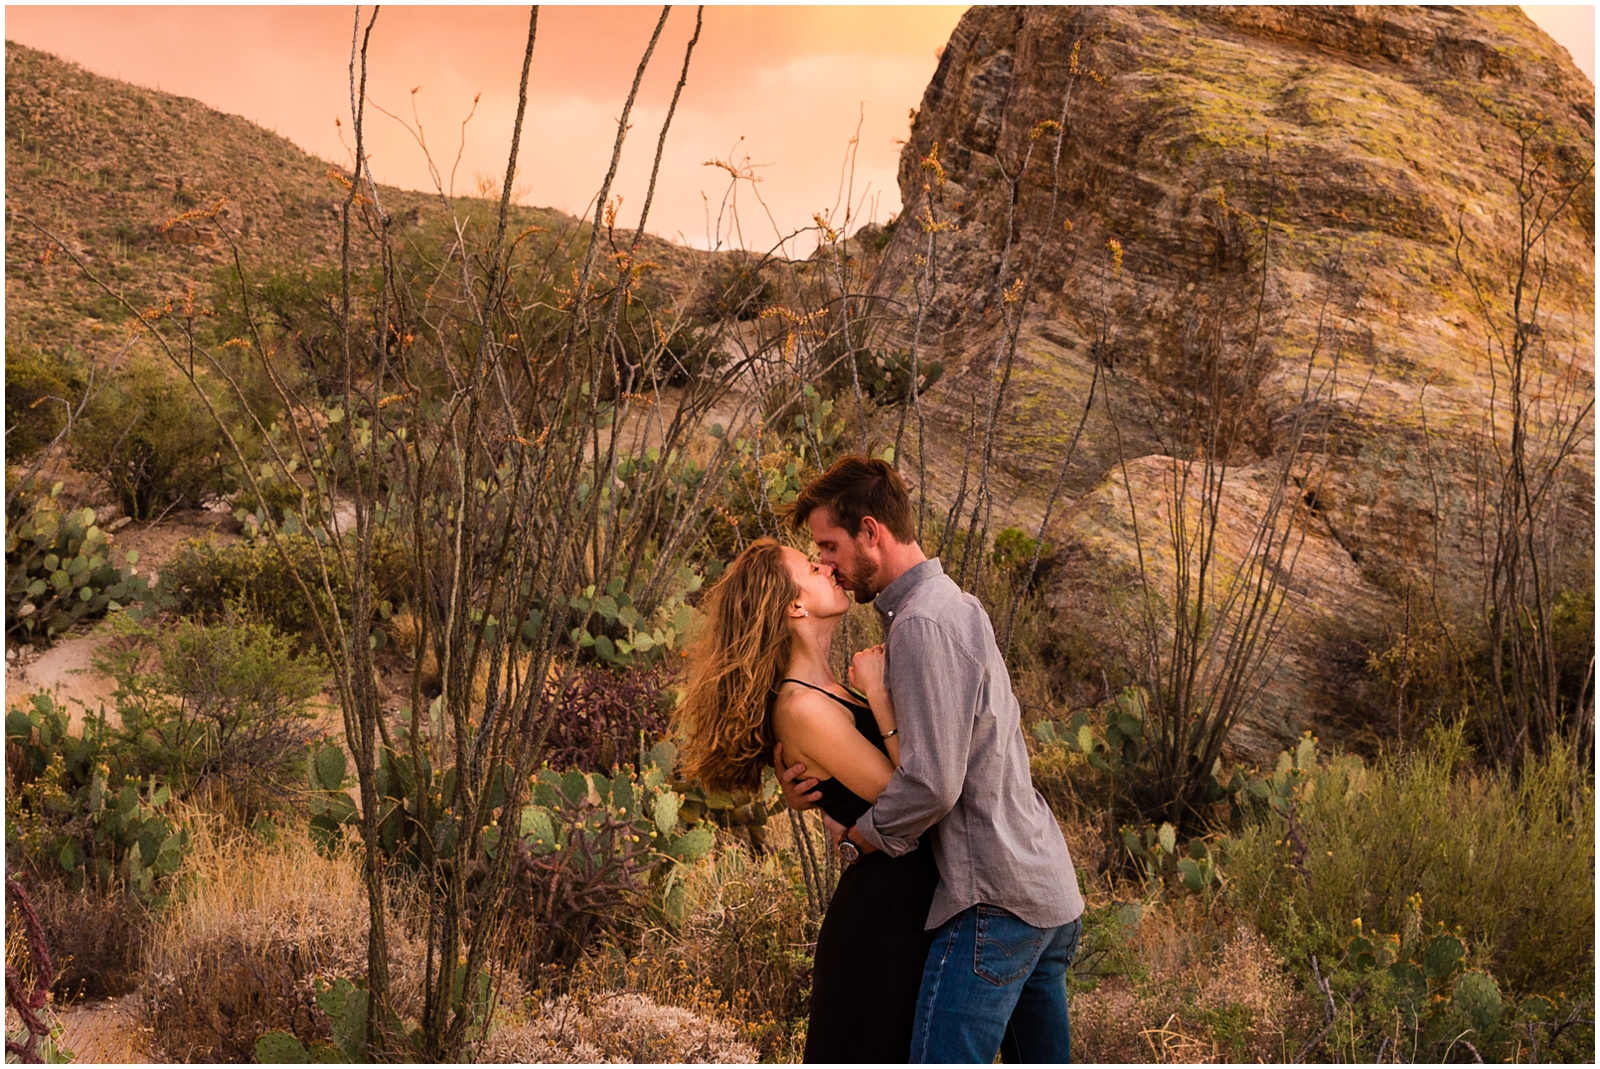 This couple kissing under a famous Arizona sunset in Saguaro National Park | Clarissa Wylde Photography